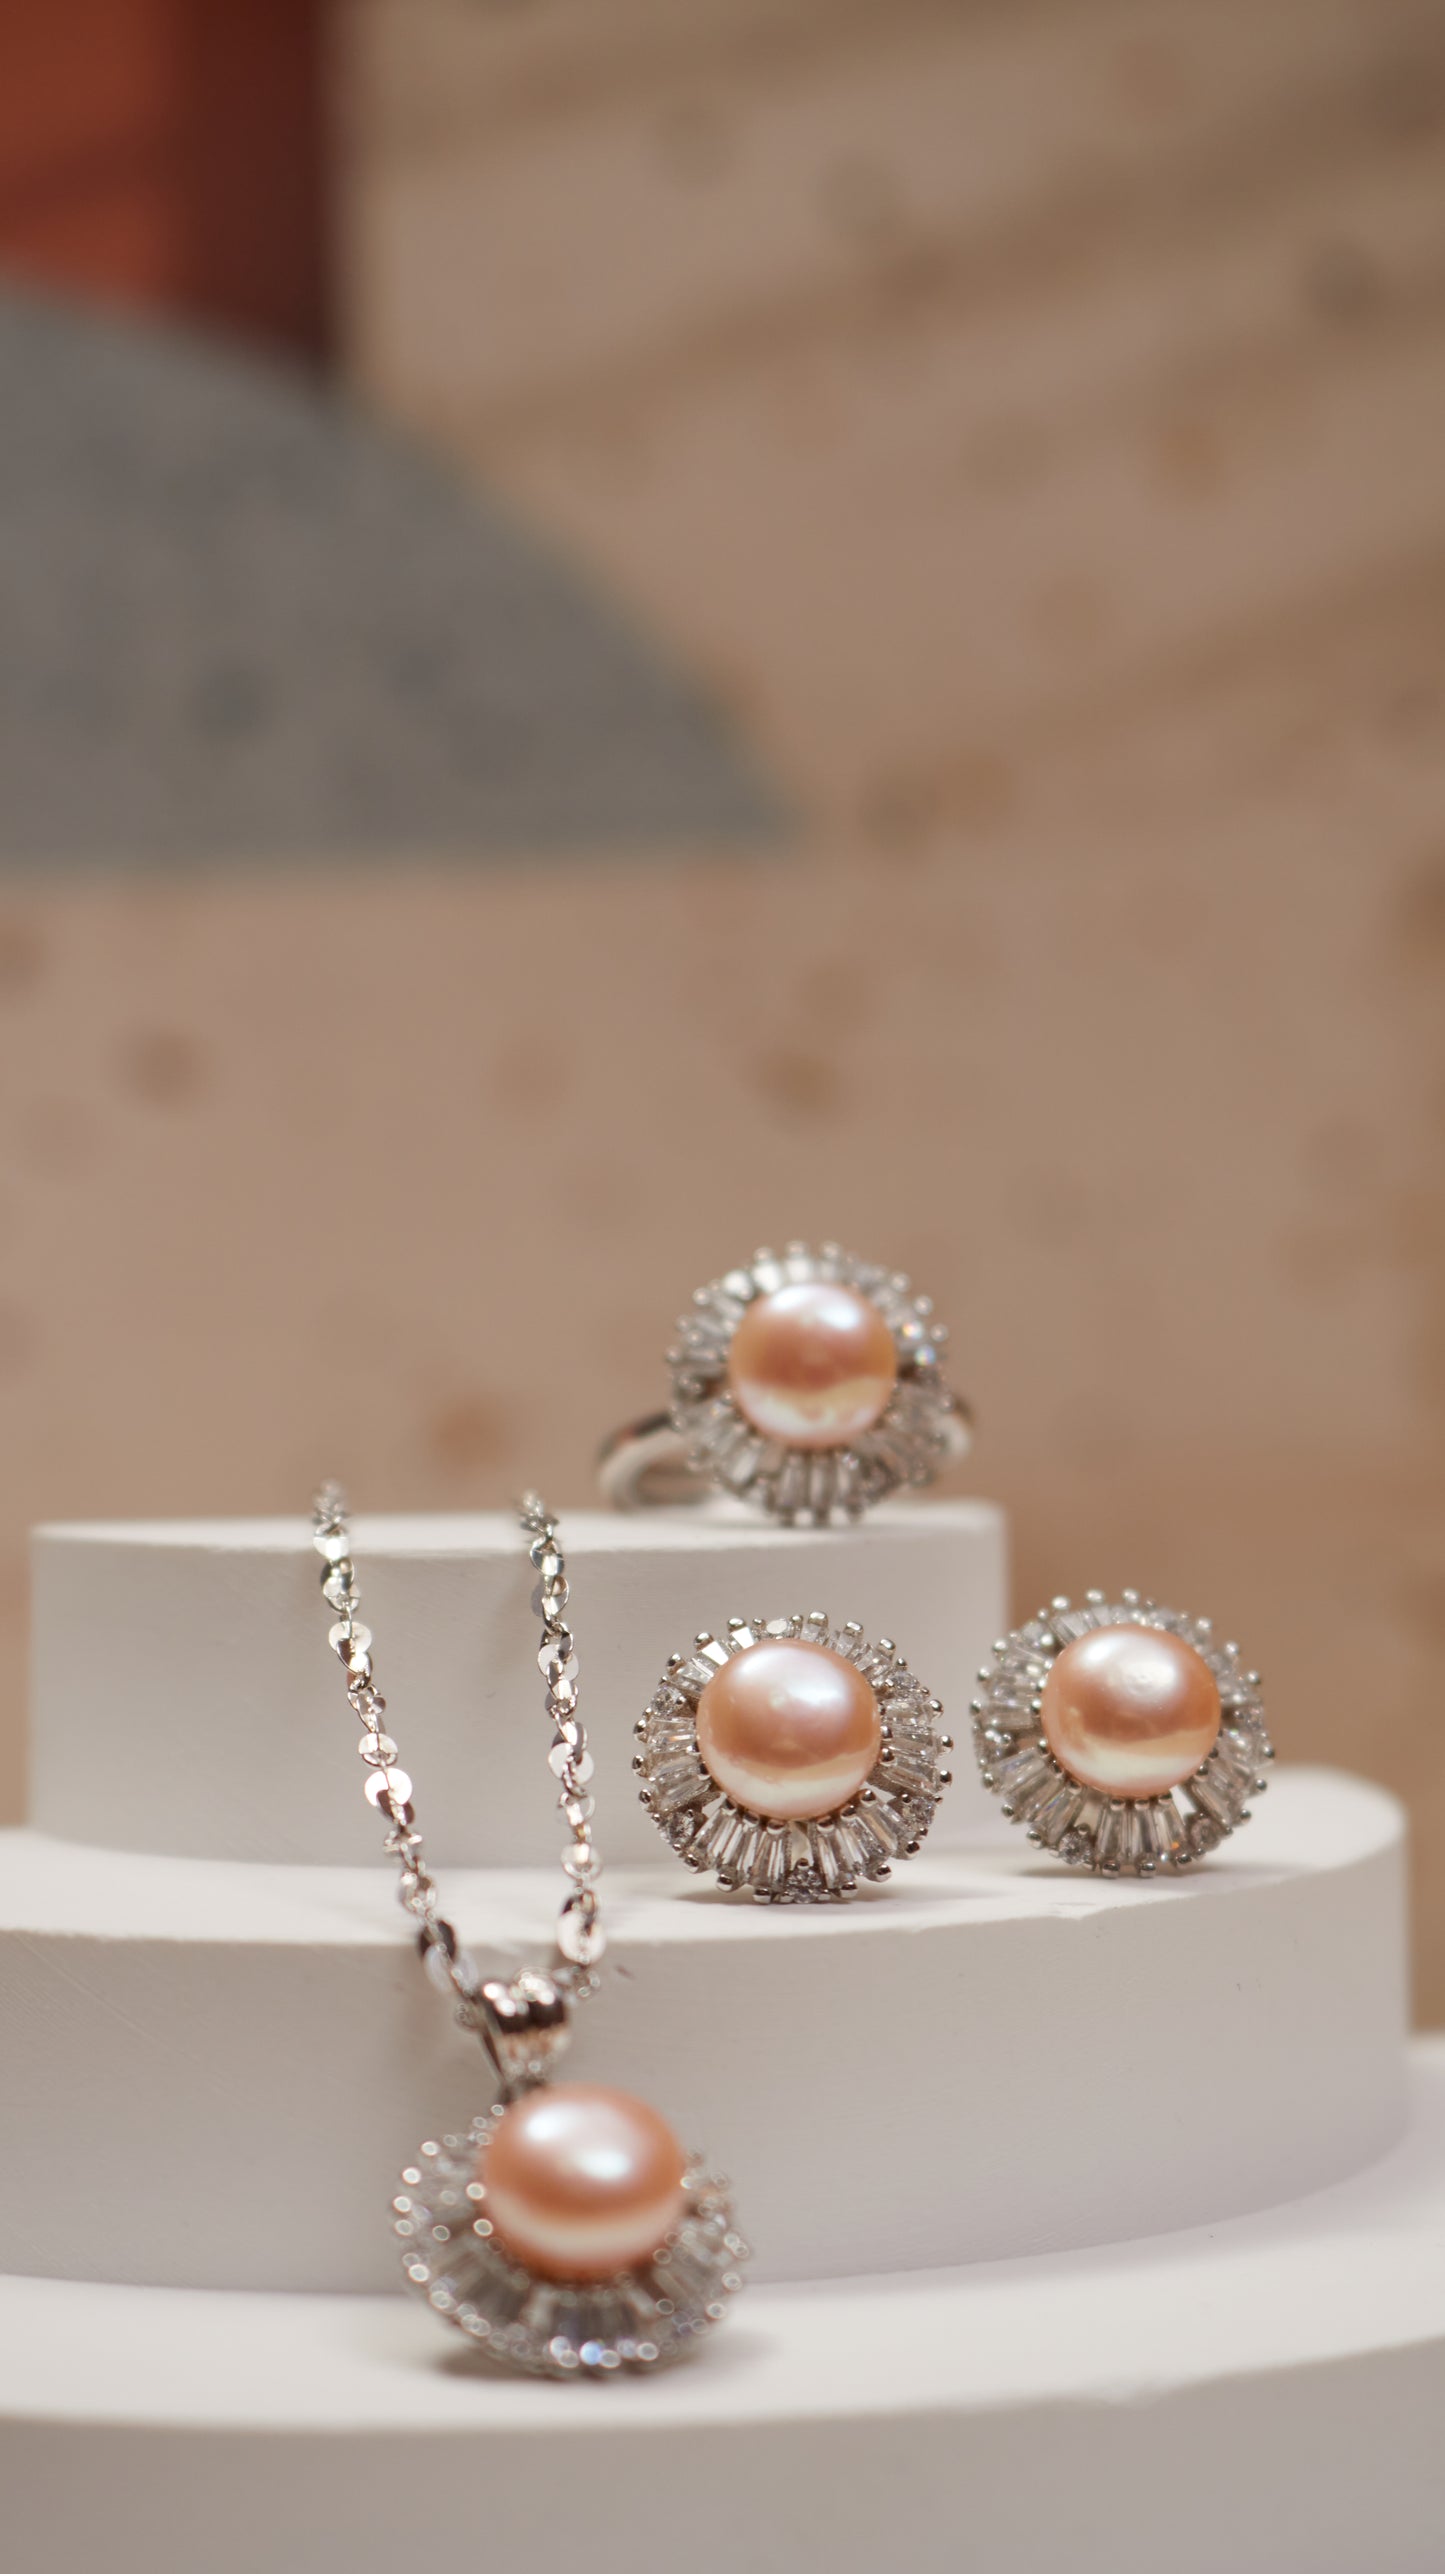 ORANGCE COLOR FRESHWATER PEARL SET